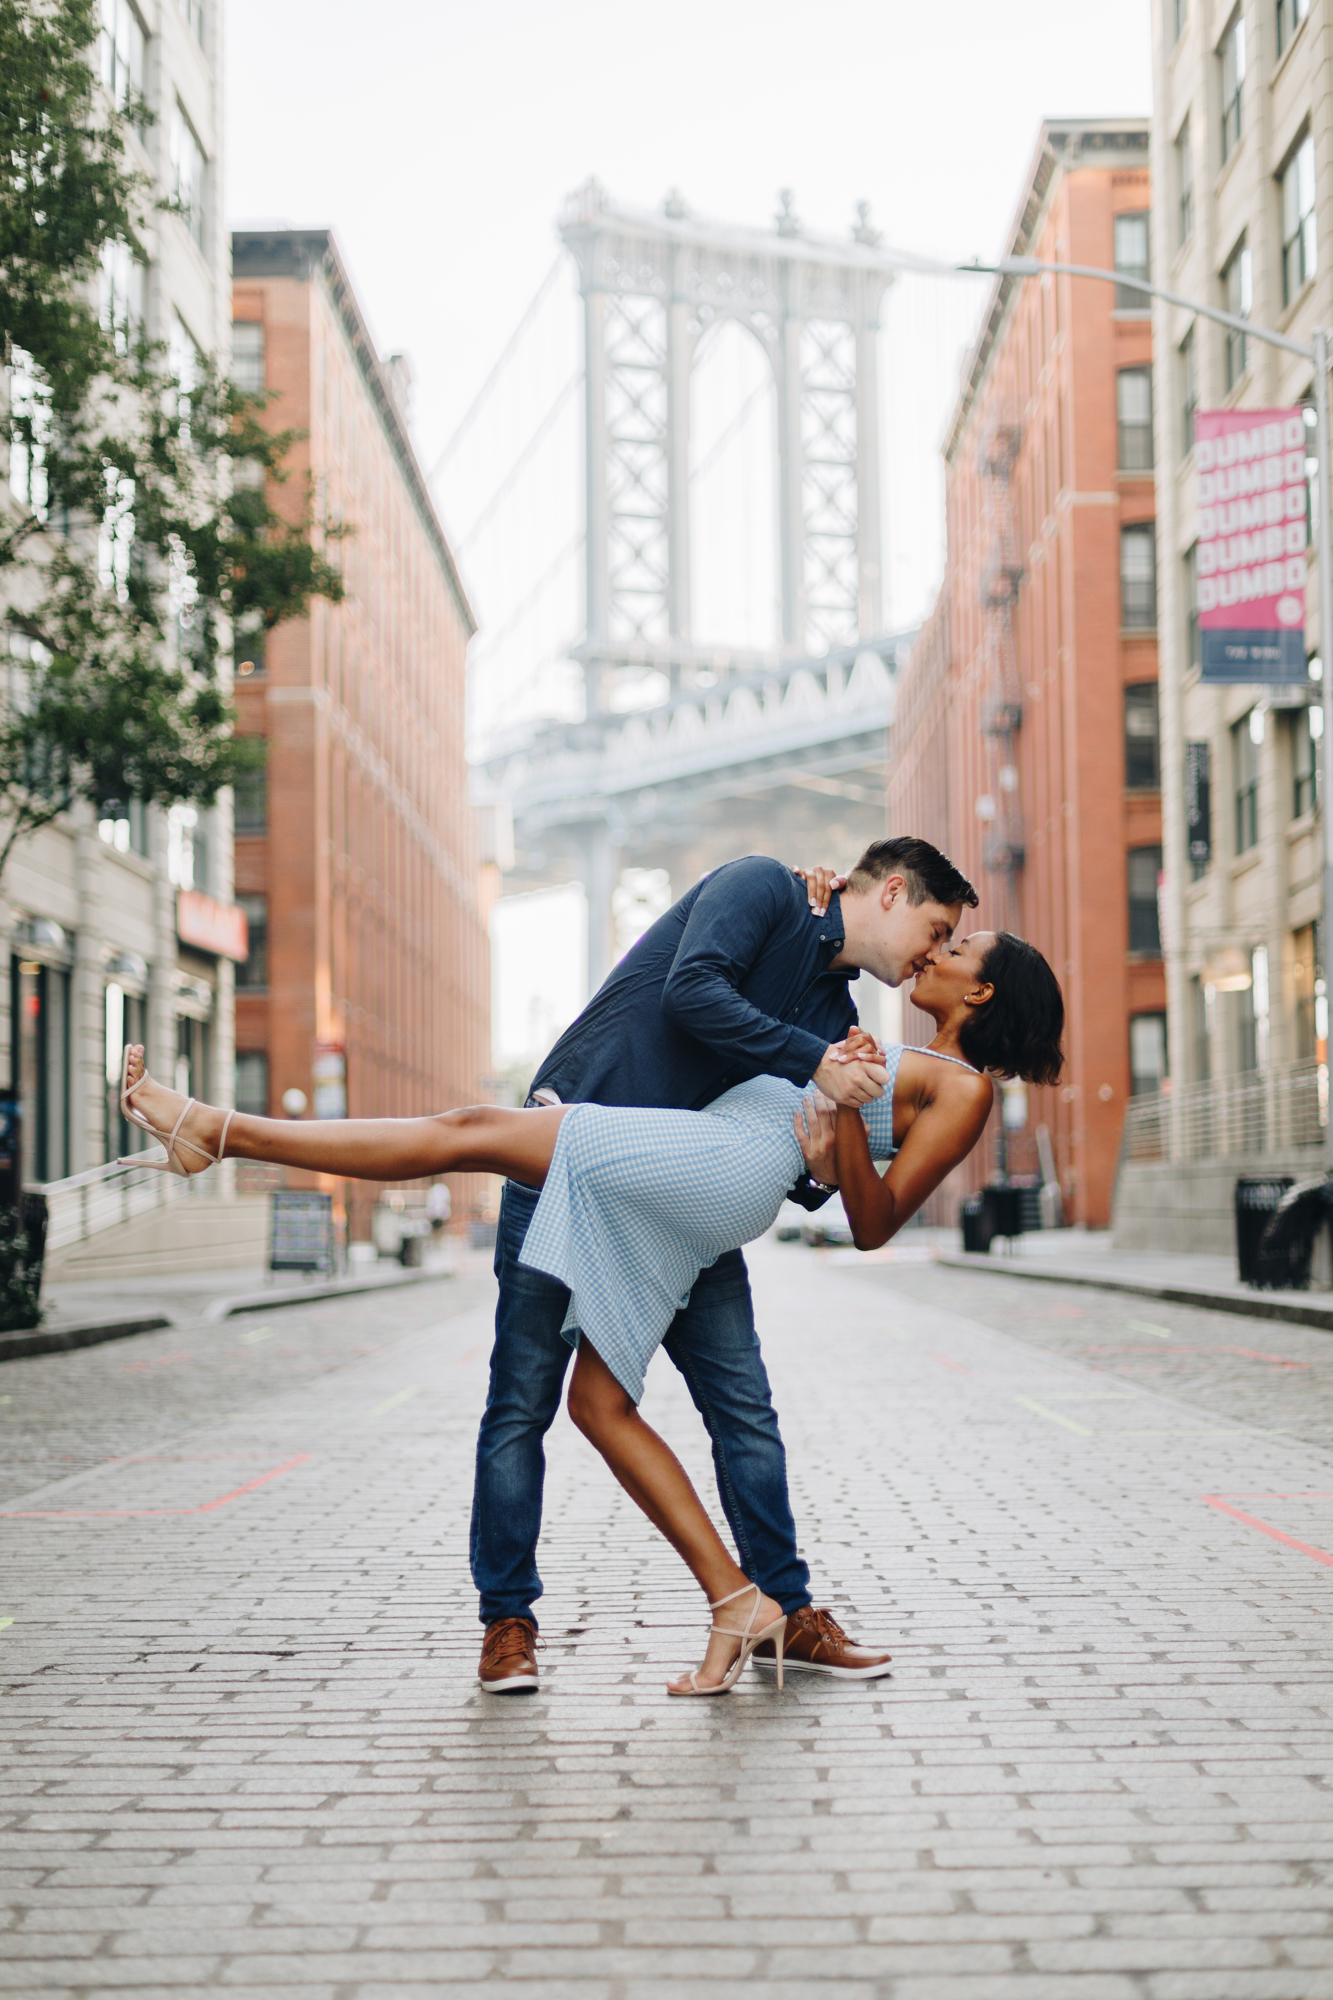 The best Engagement Photo Locations in New York City